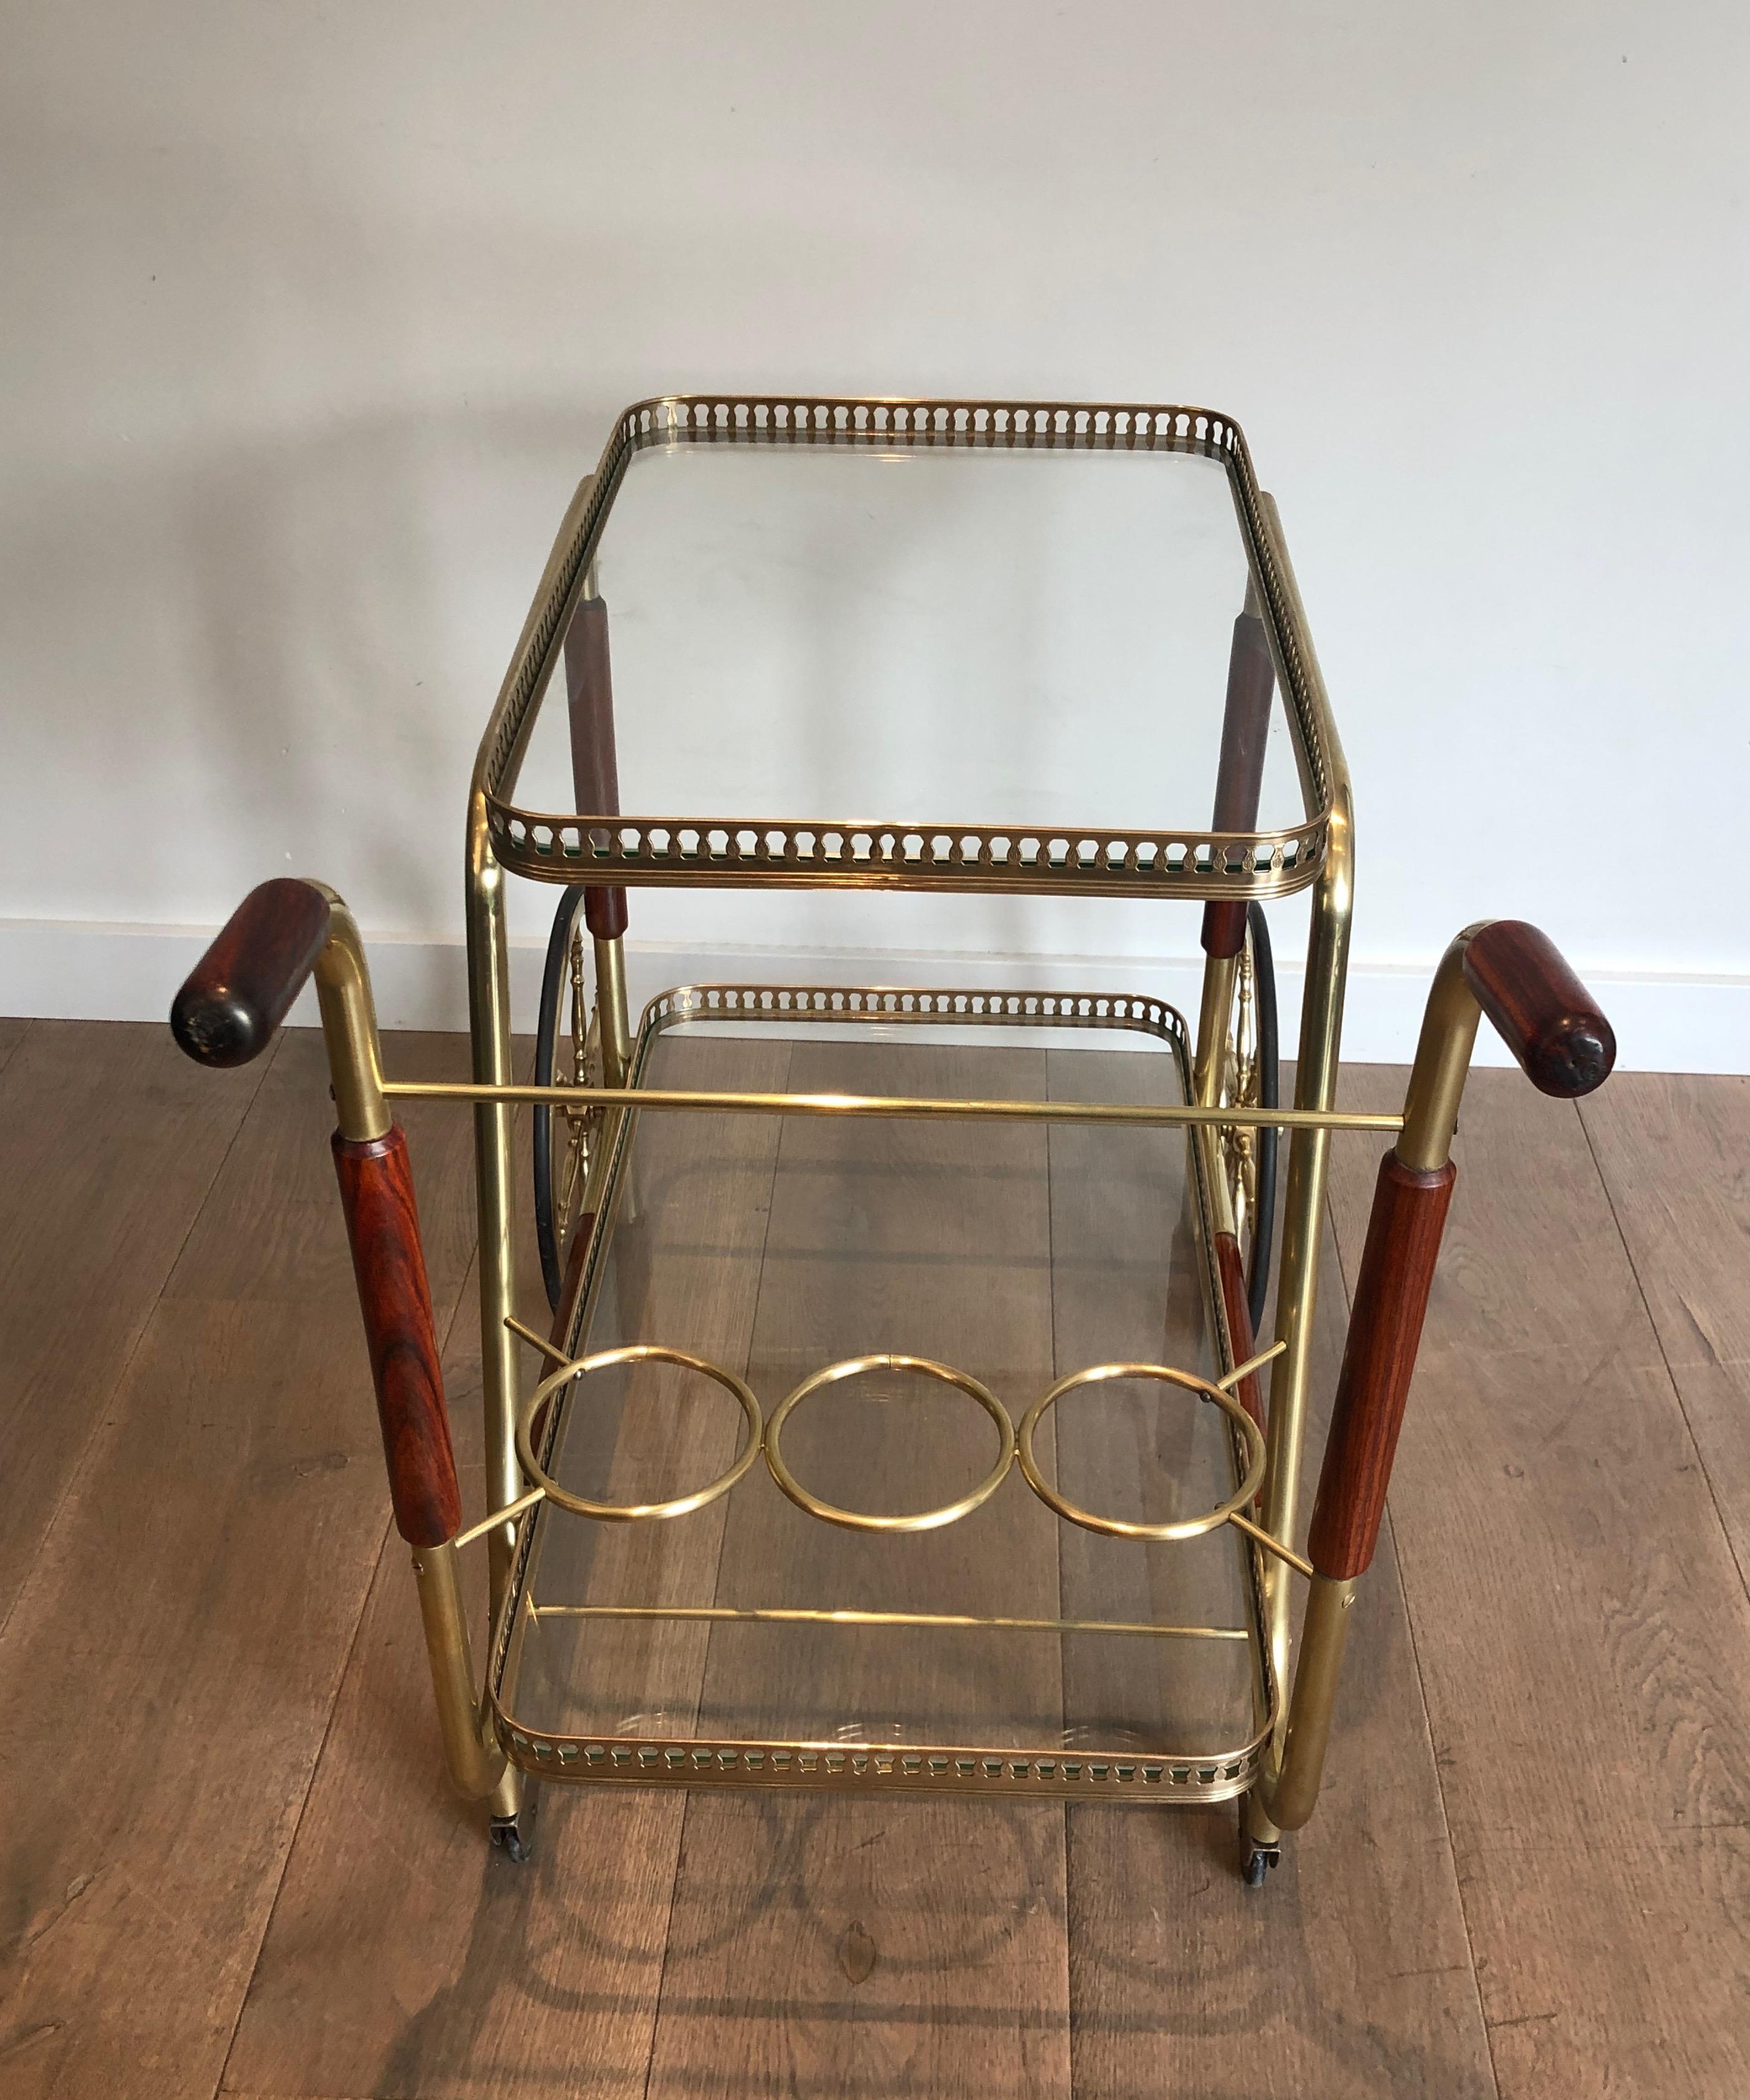 Mid-20th Century Mahogany and Brass Drinks Trolley, French Work, circa 1940